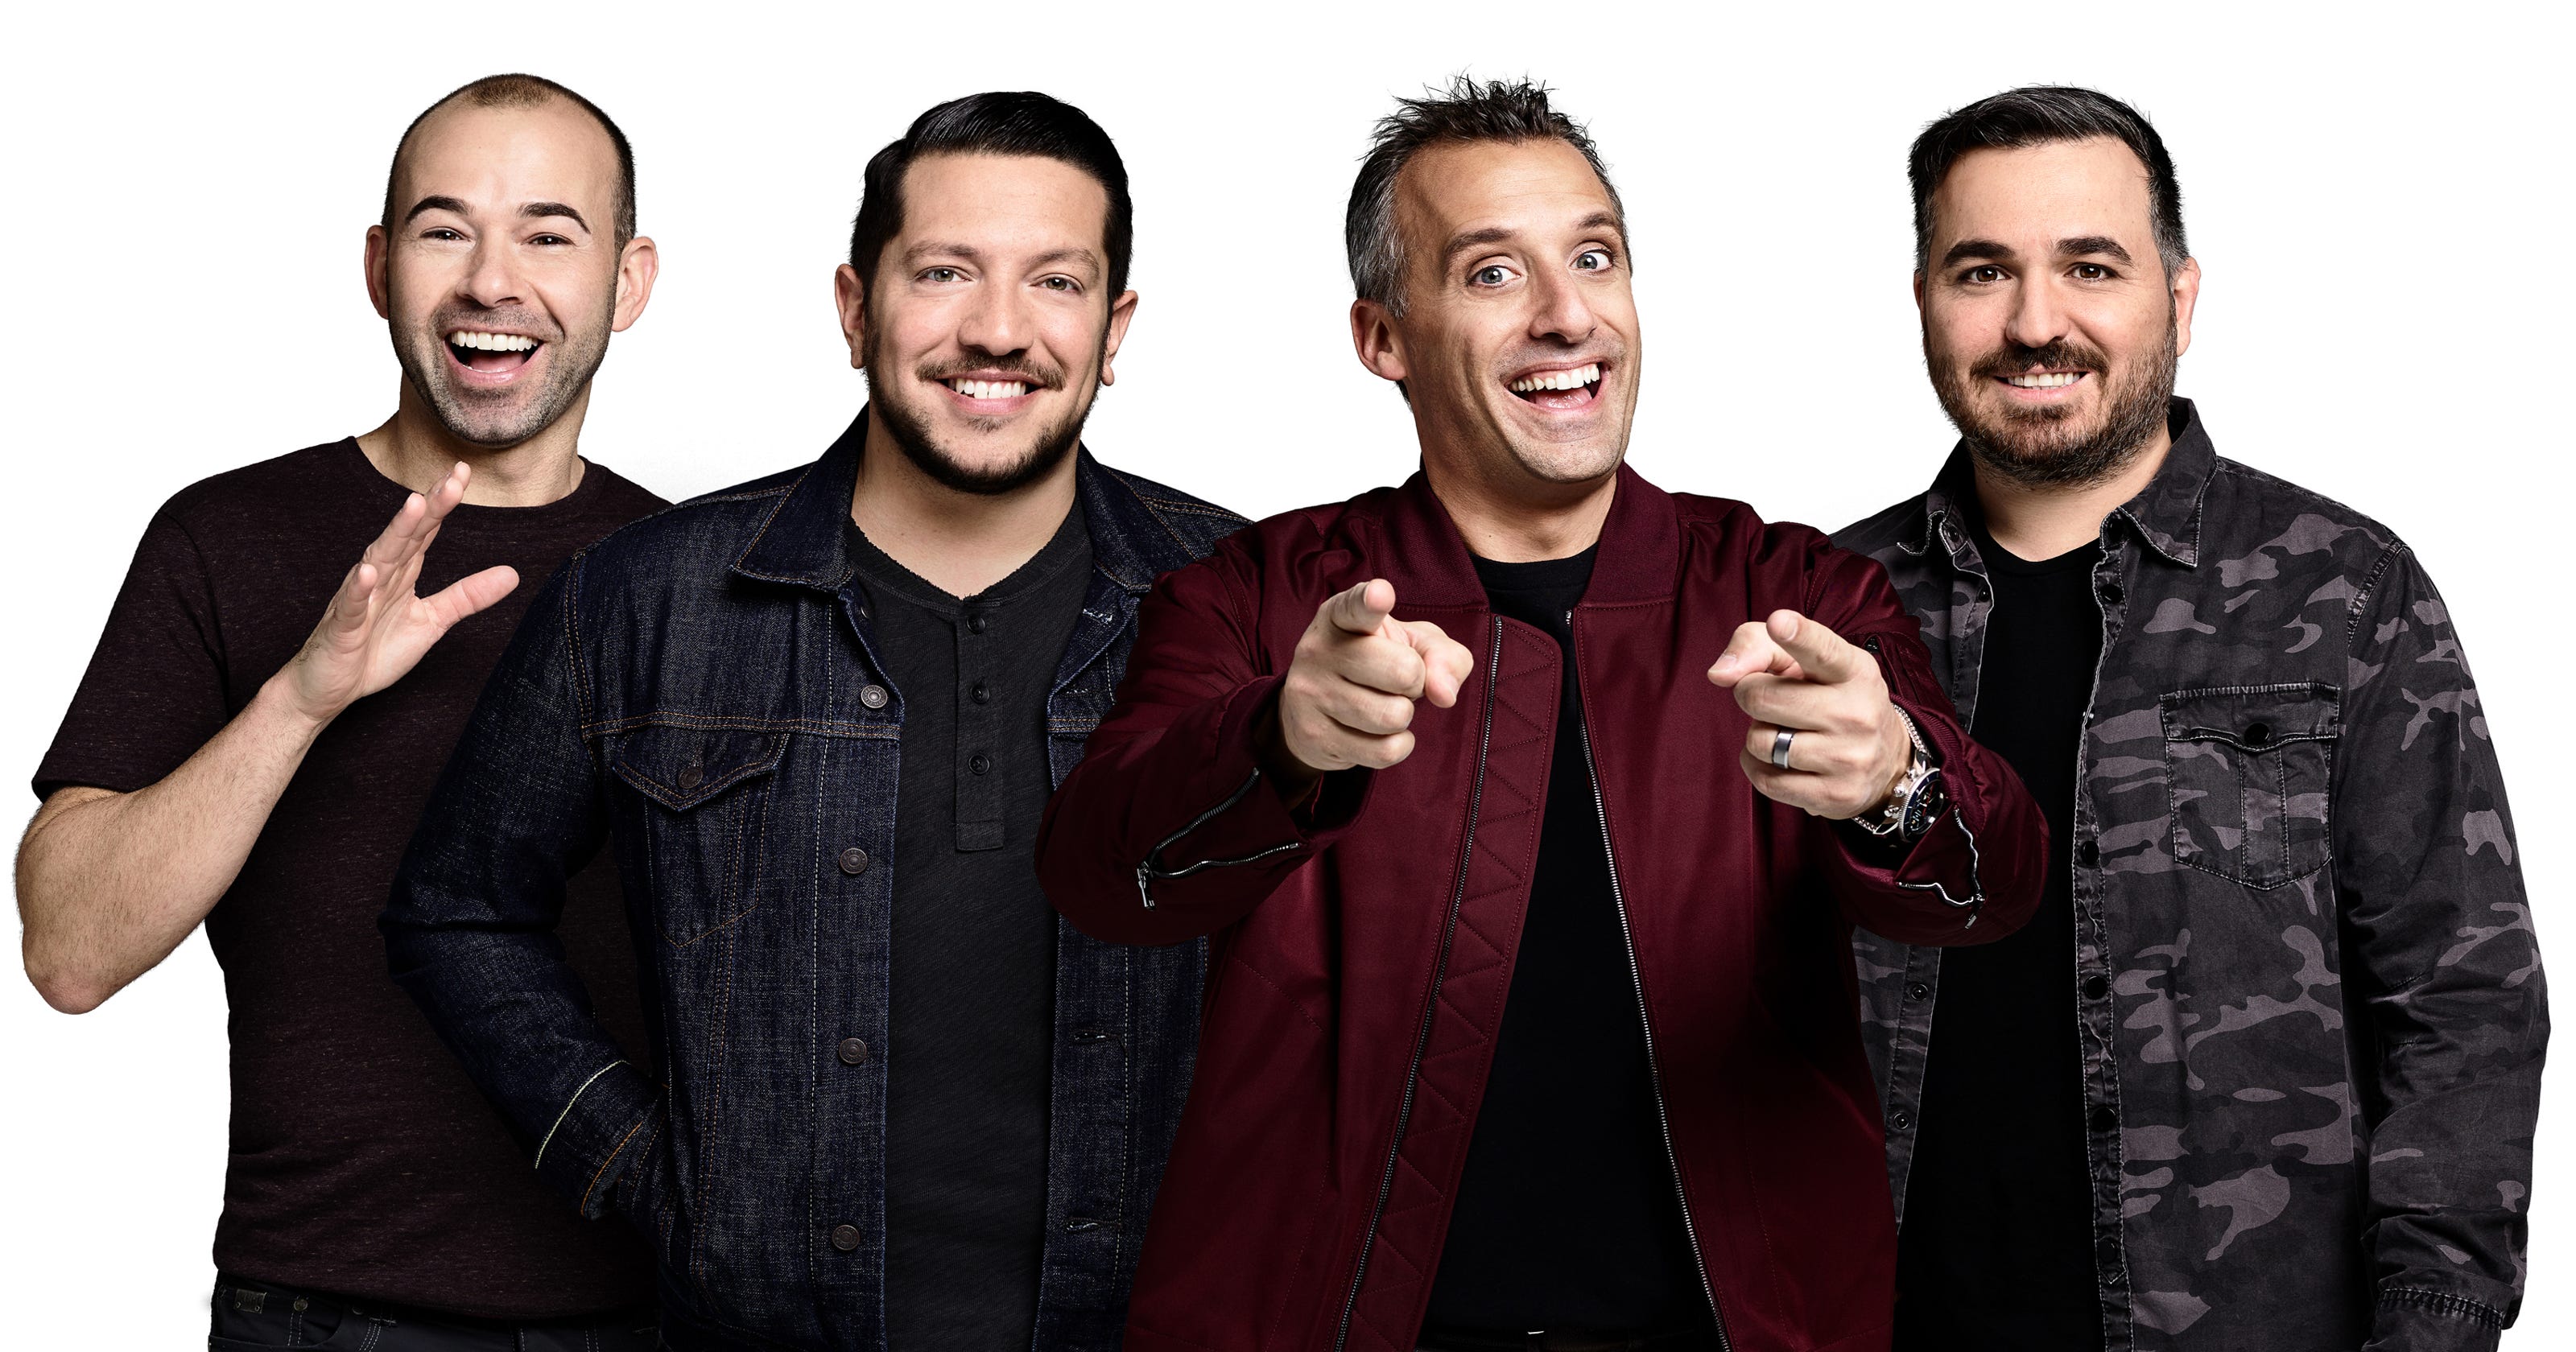 Impractical Jokers Knoxville Stars of truTV show coming in Aug.